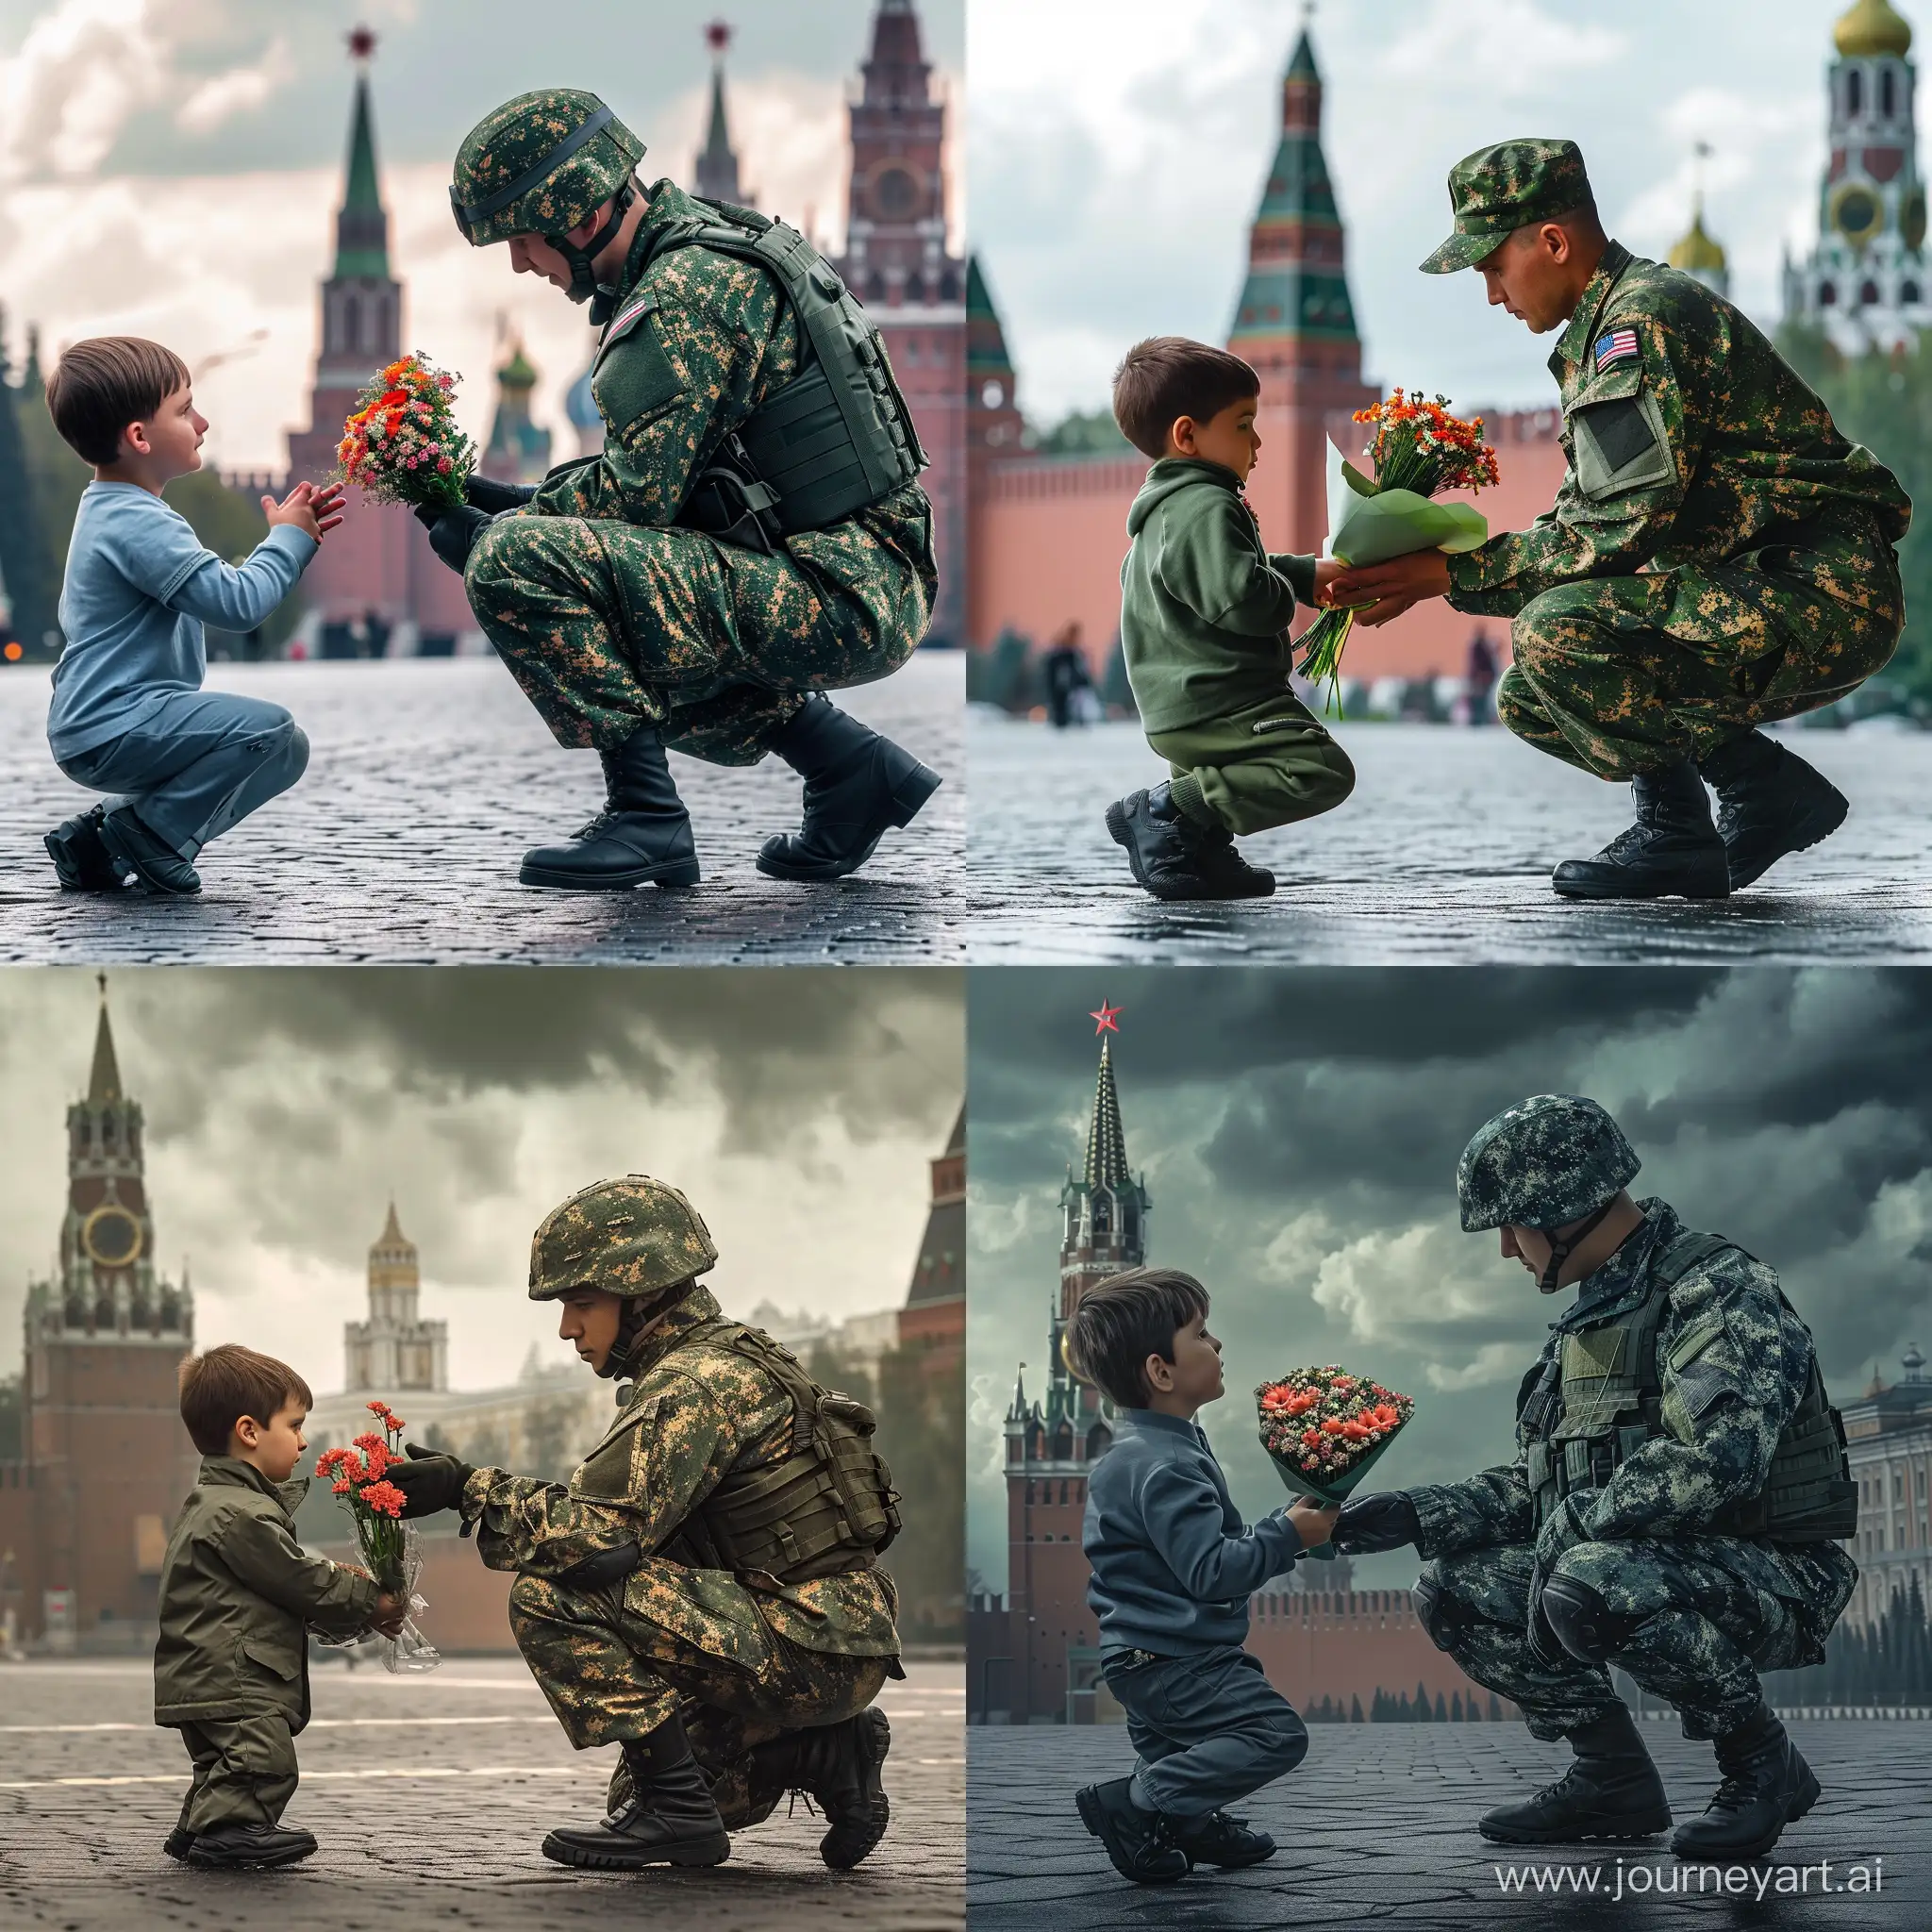 Russian-Soldier-Gifting-Flowers-to-Little-Boy-at-the-Kremlin